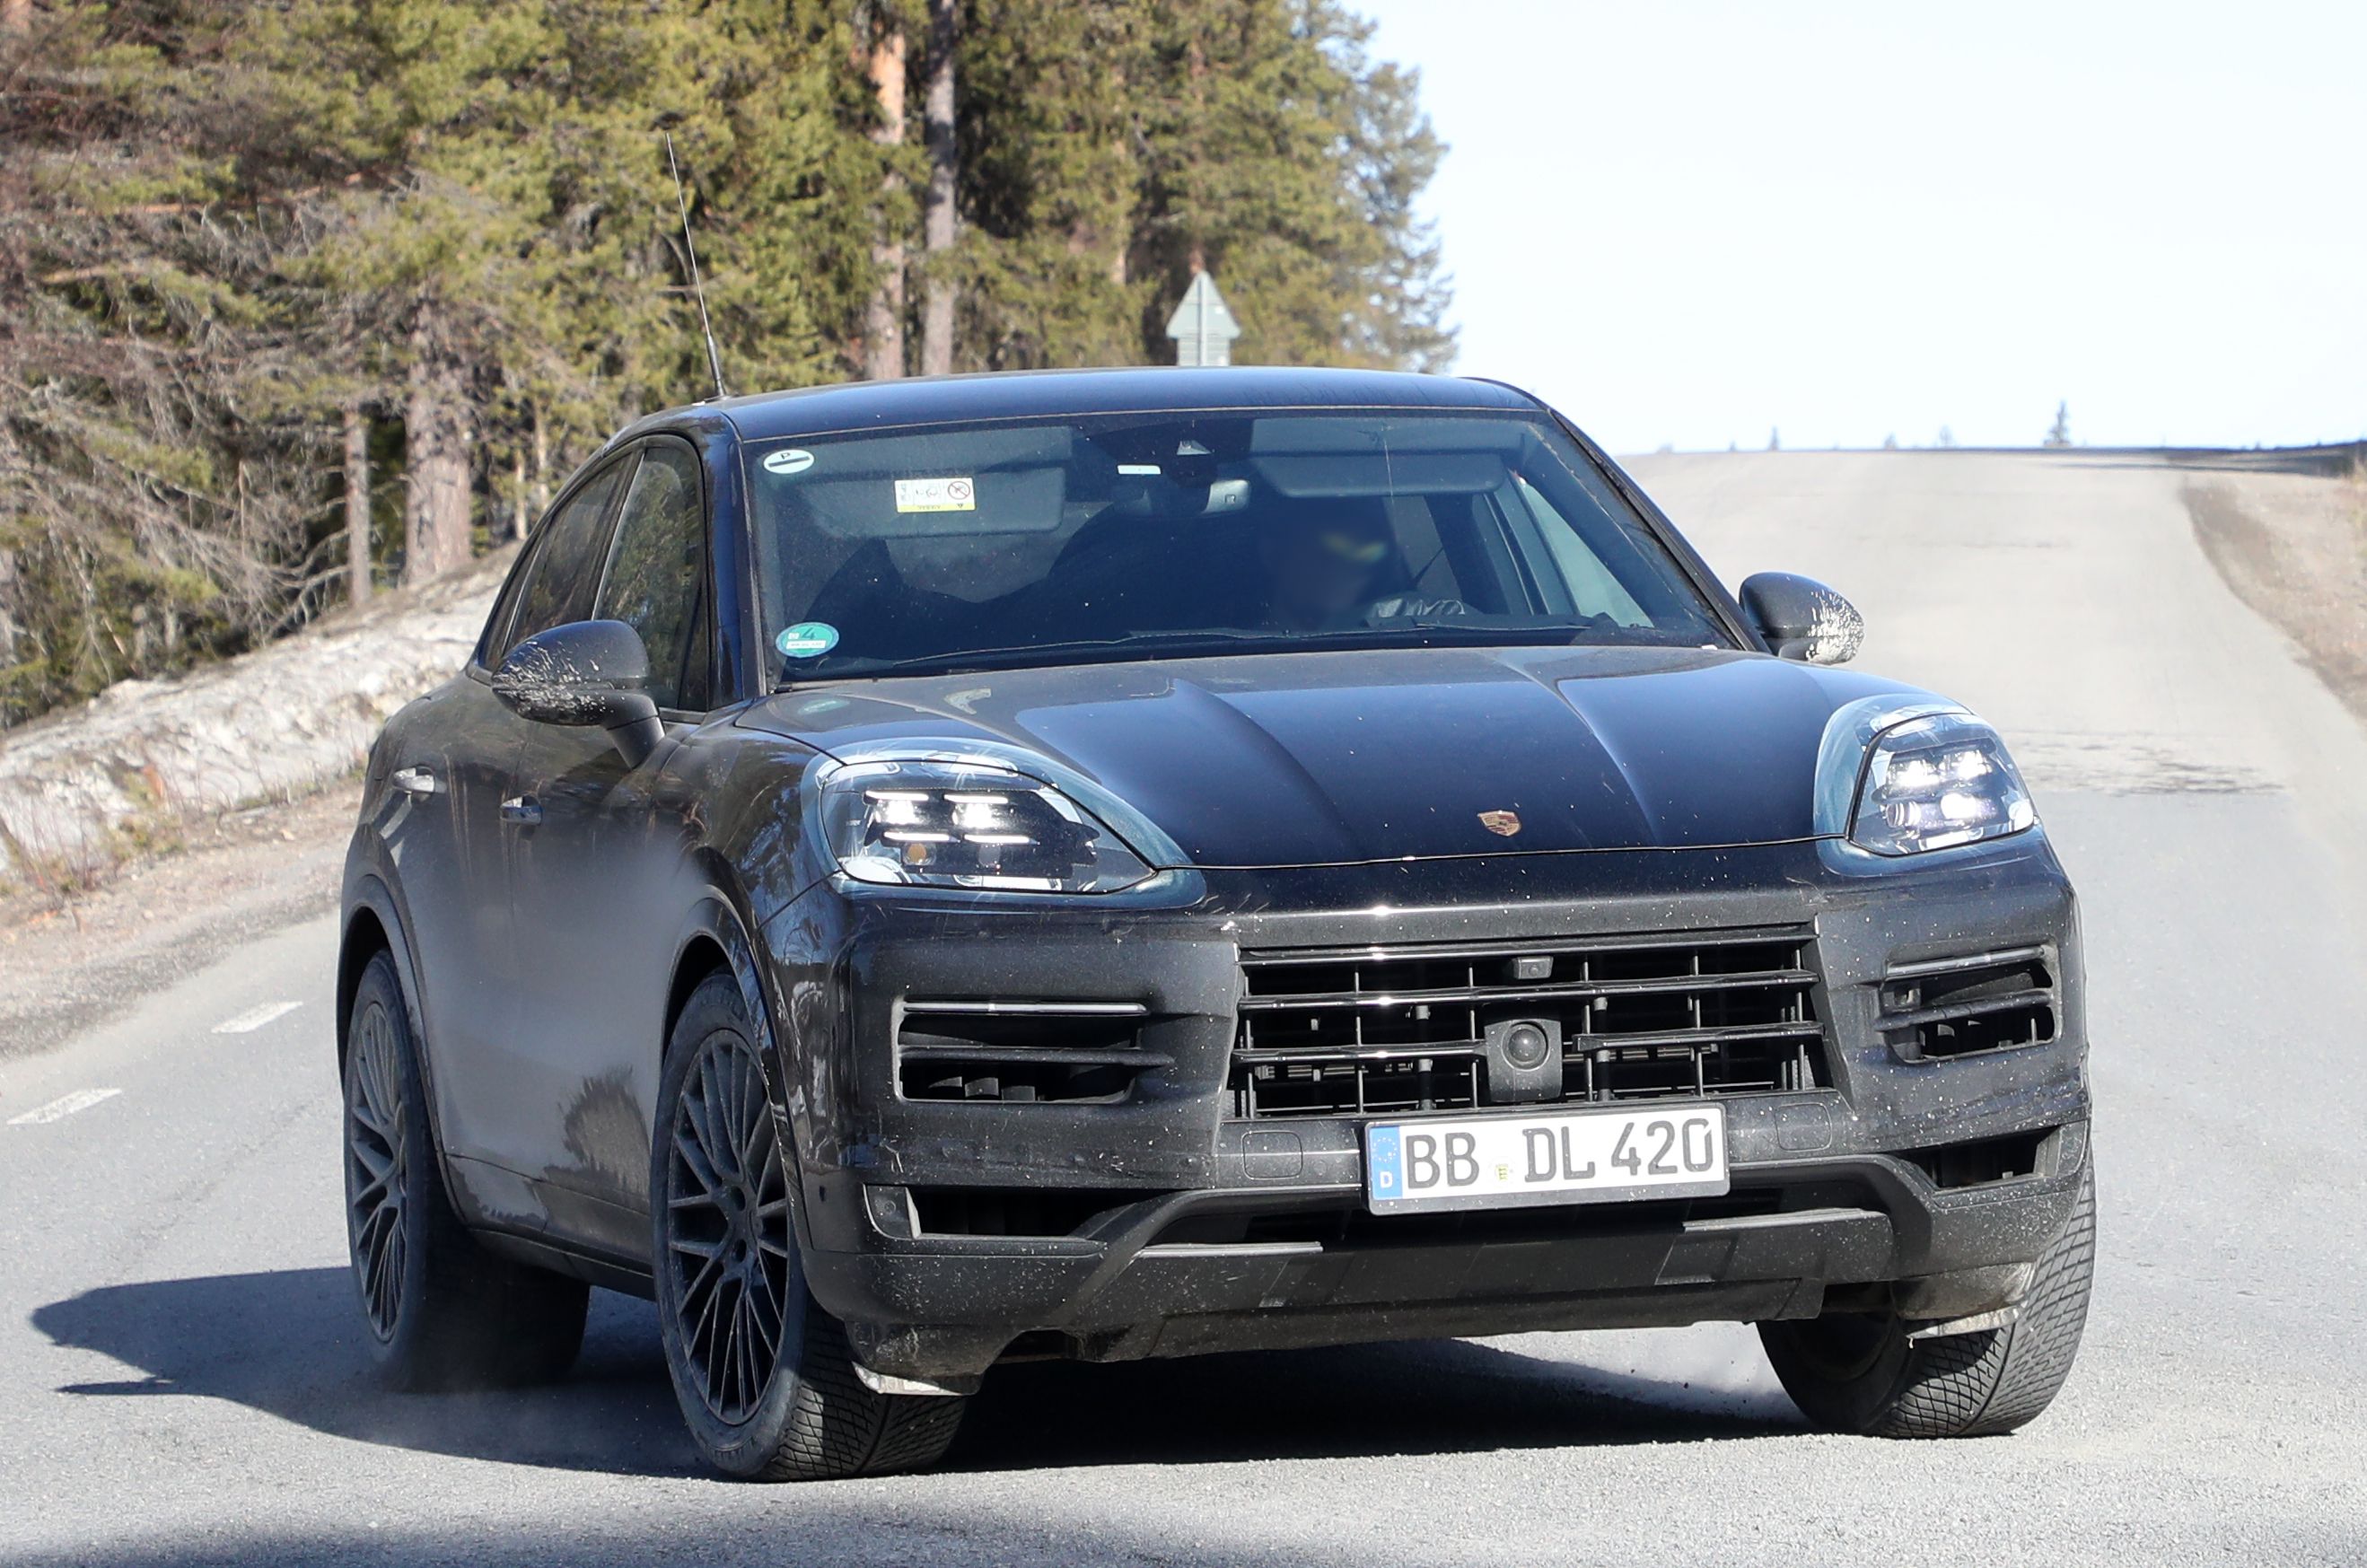 2023 Porsche Cayenne price, facelift, india review, performance, features,  design - Introduction